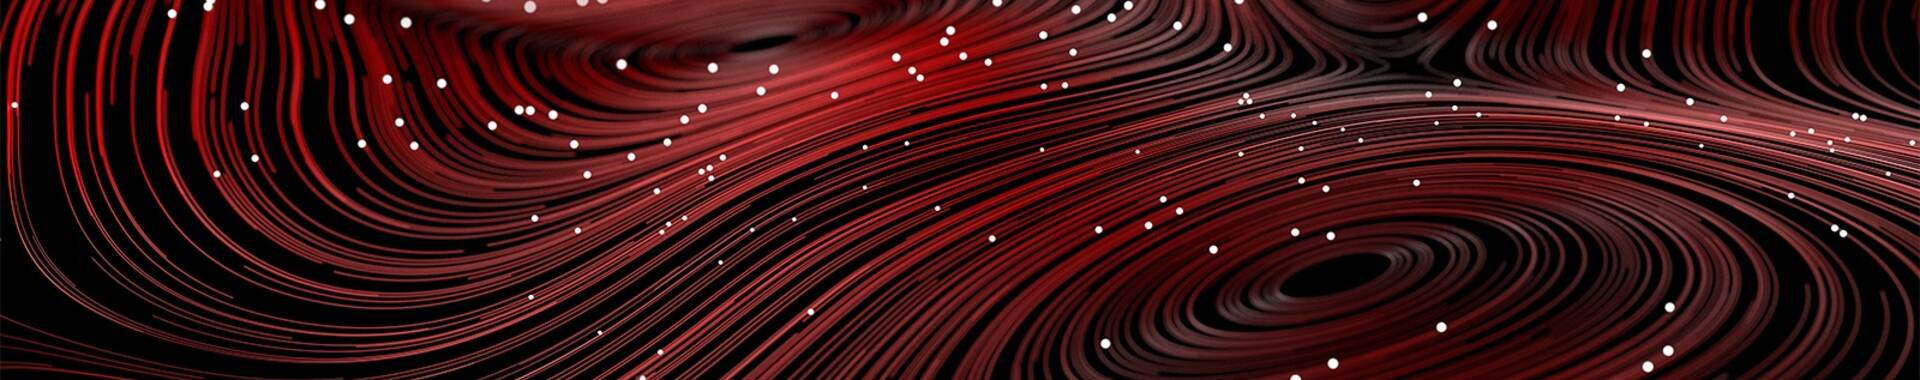 abstract image of red swirls and white dots